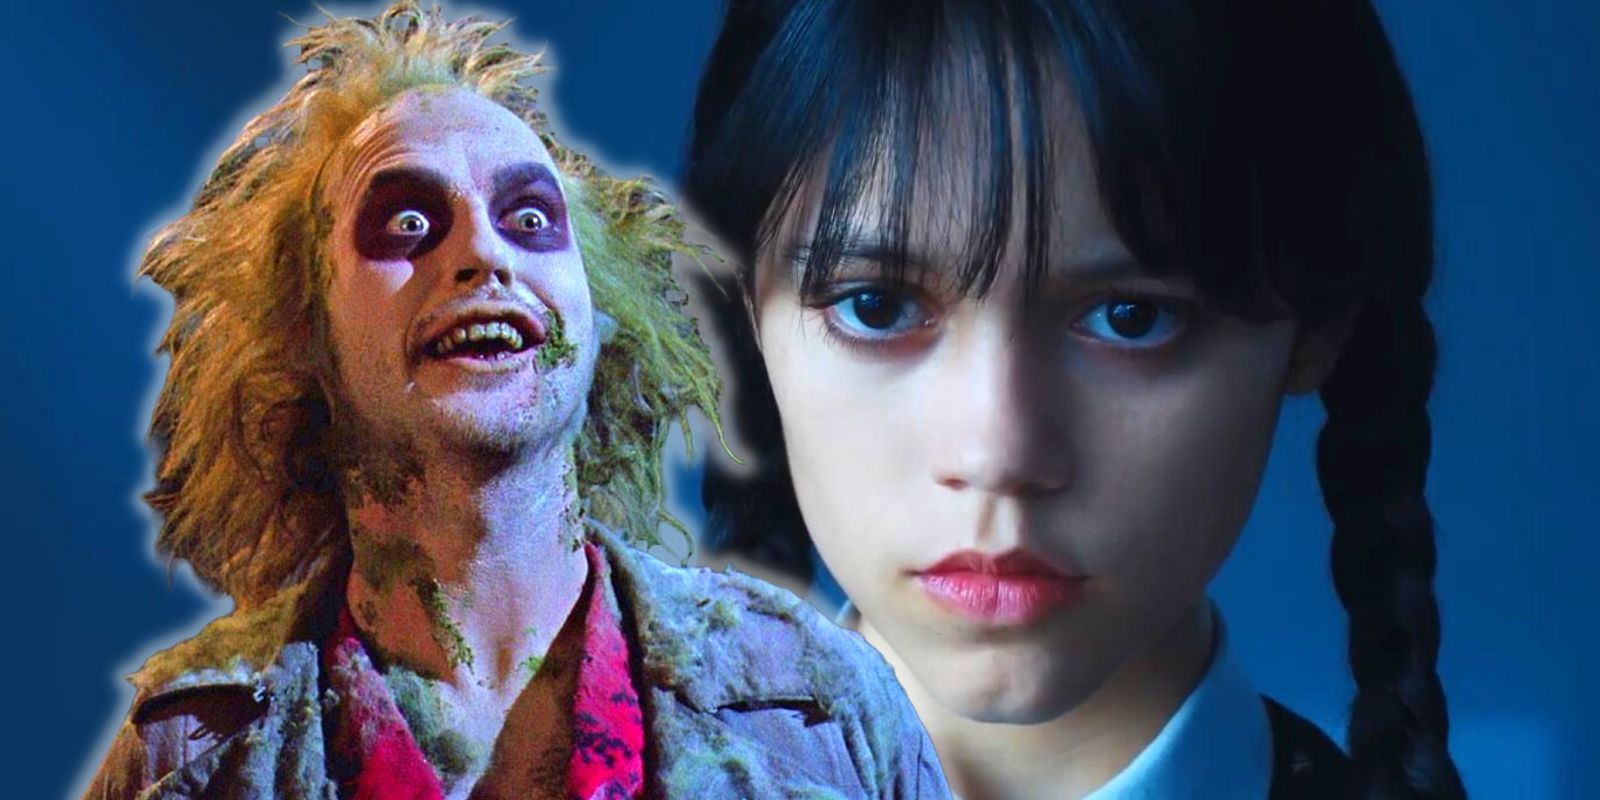 BEETLEJUICE 2 Set Photos Offer First Look at Winona Ryder as Lydia